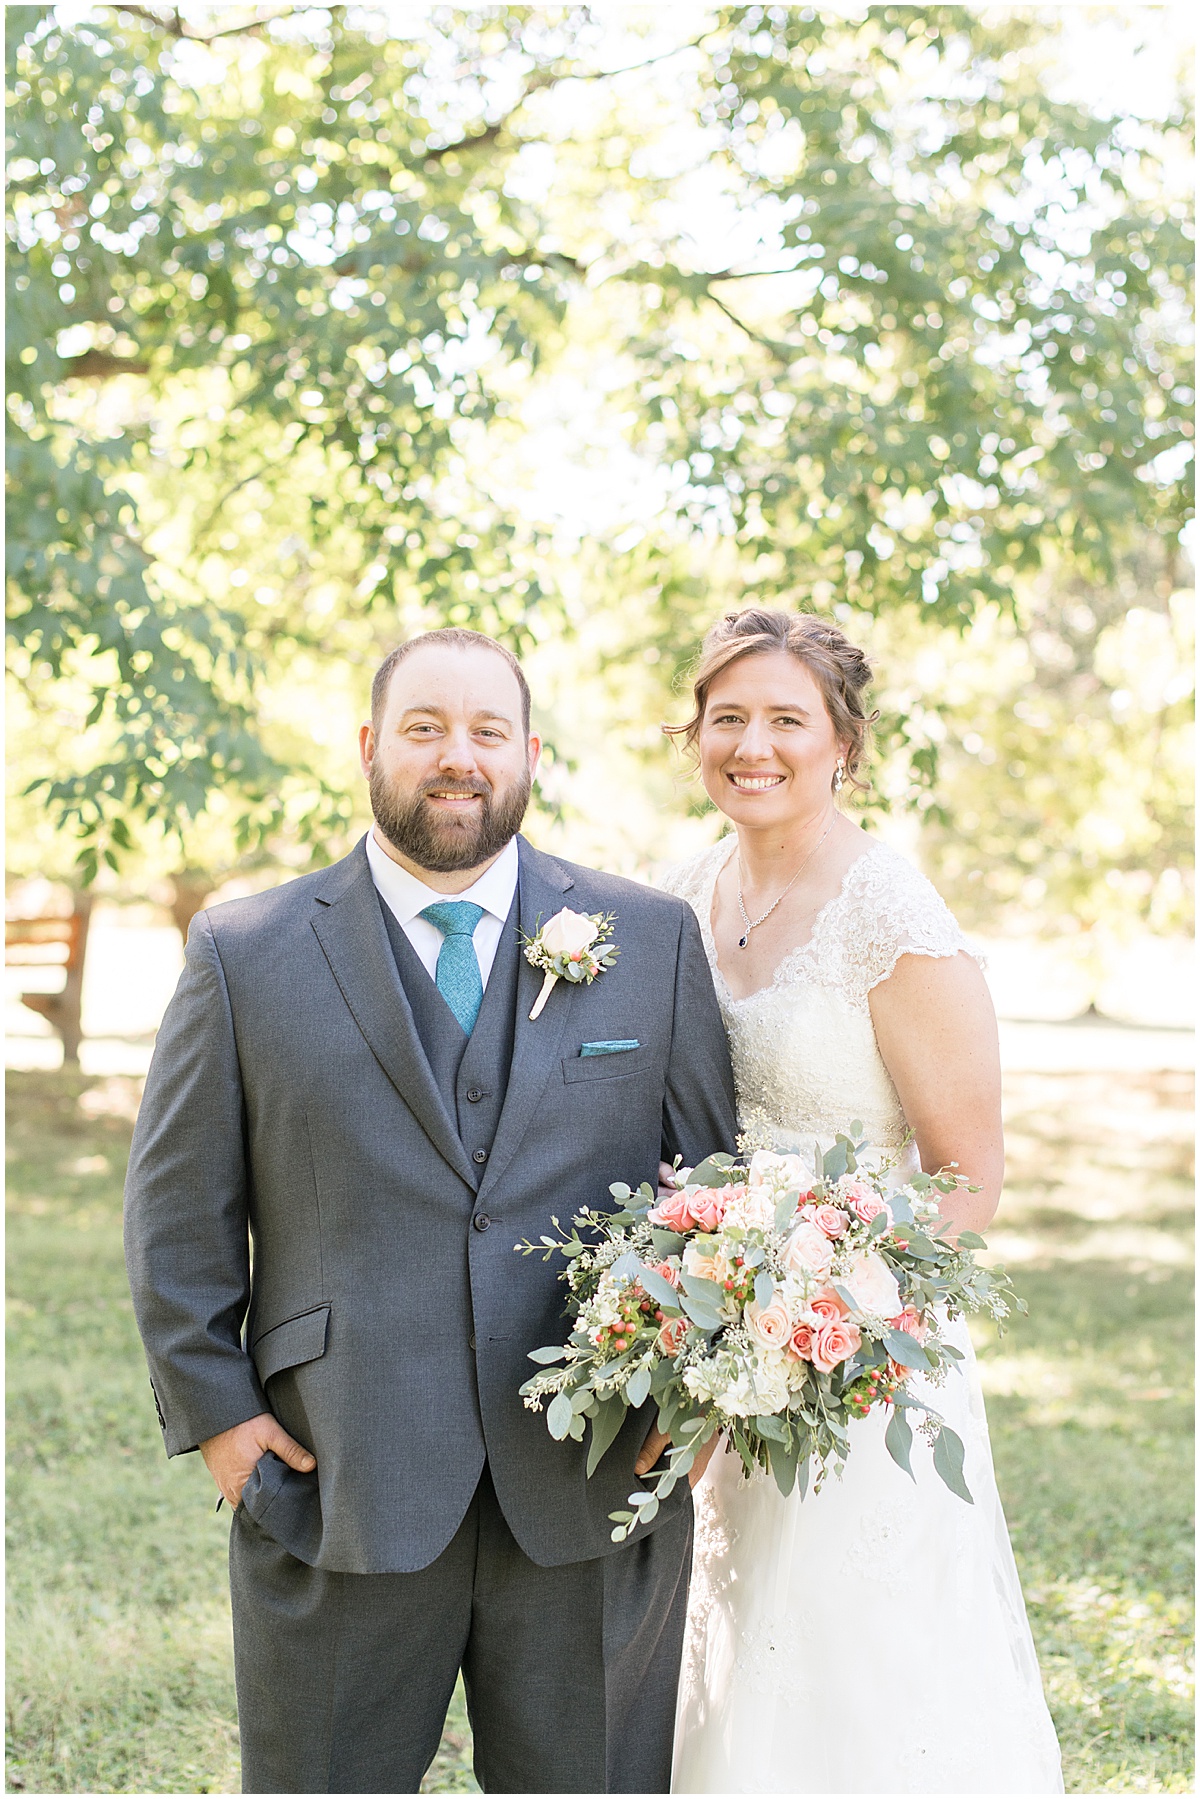 Bride and groom portraits for intimate wedding at Holliday Park in Indianapolis by Victoria Rayburn Photography